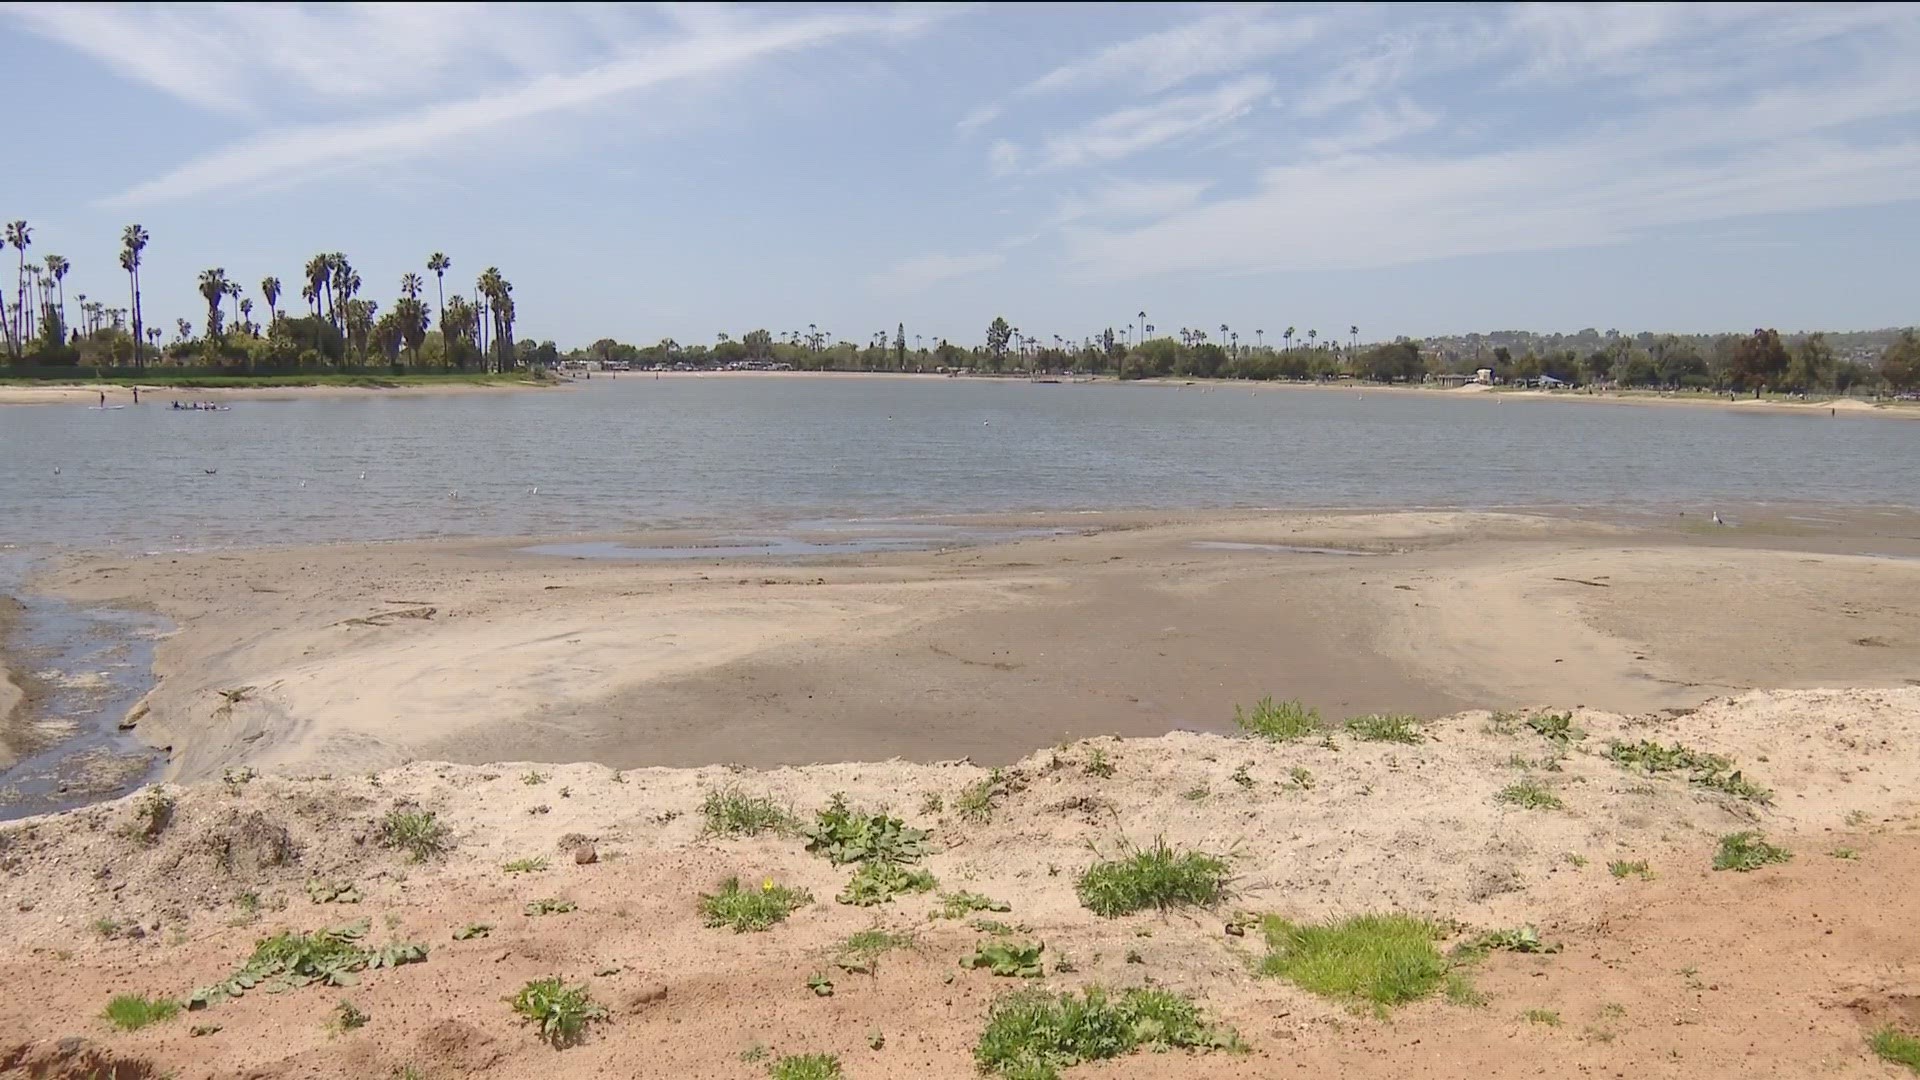 The area around De Anza Cove has been a point of contention for years and there is a new twist in the chapter of this story.